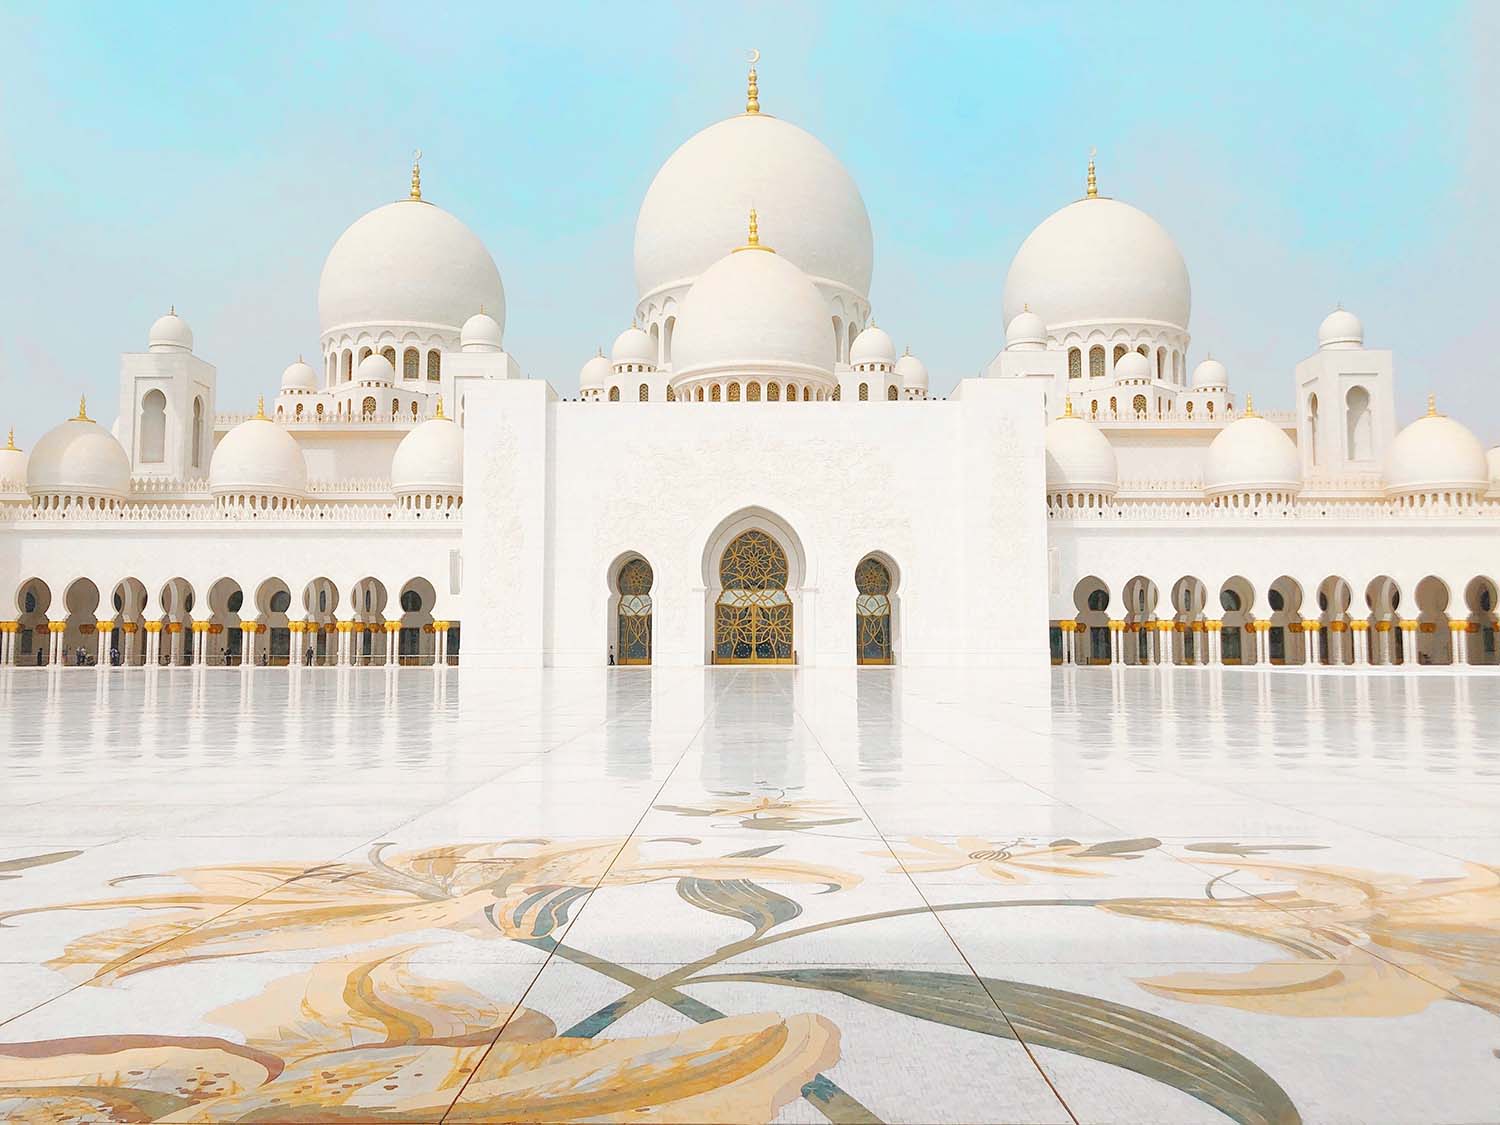 Moving to Abu Dhabi: Expat Life in the UAE Capital